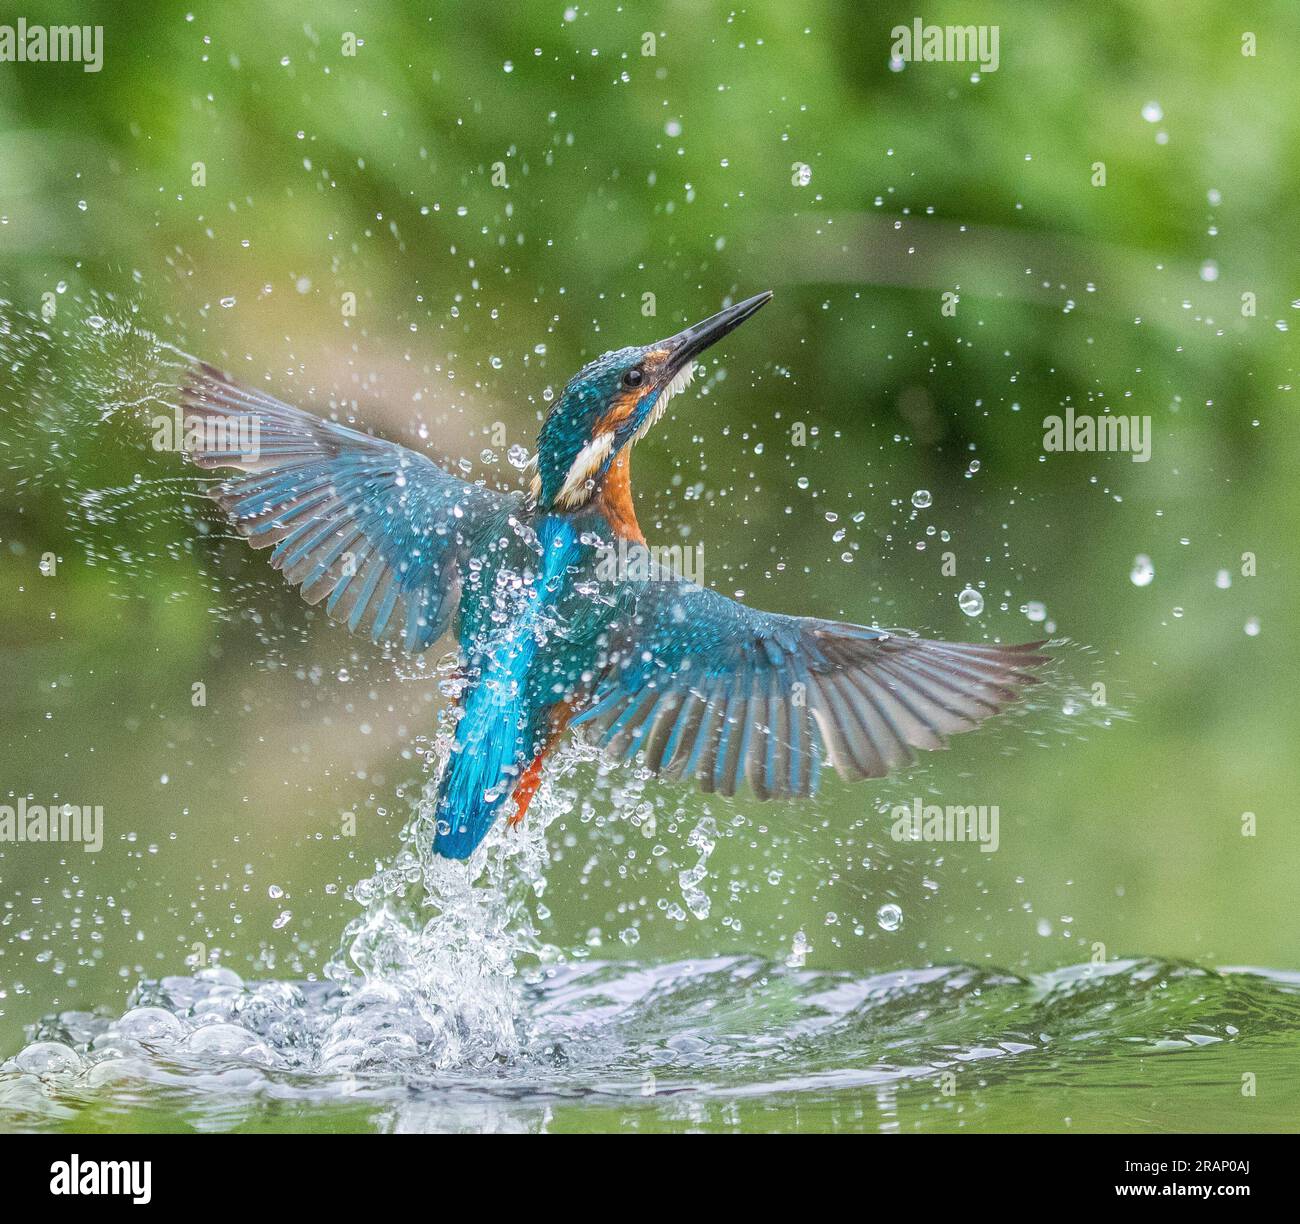 The kingfisher stirs up the water BEDFORDSHIRE, ENGLAND STUNNING IMAGES taken by a dogwalker show a kingfisher smashing into water as it homed in on i Stock Photo